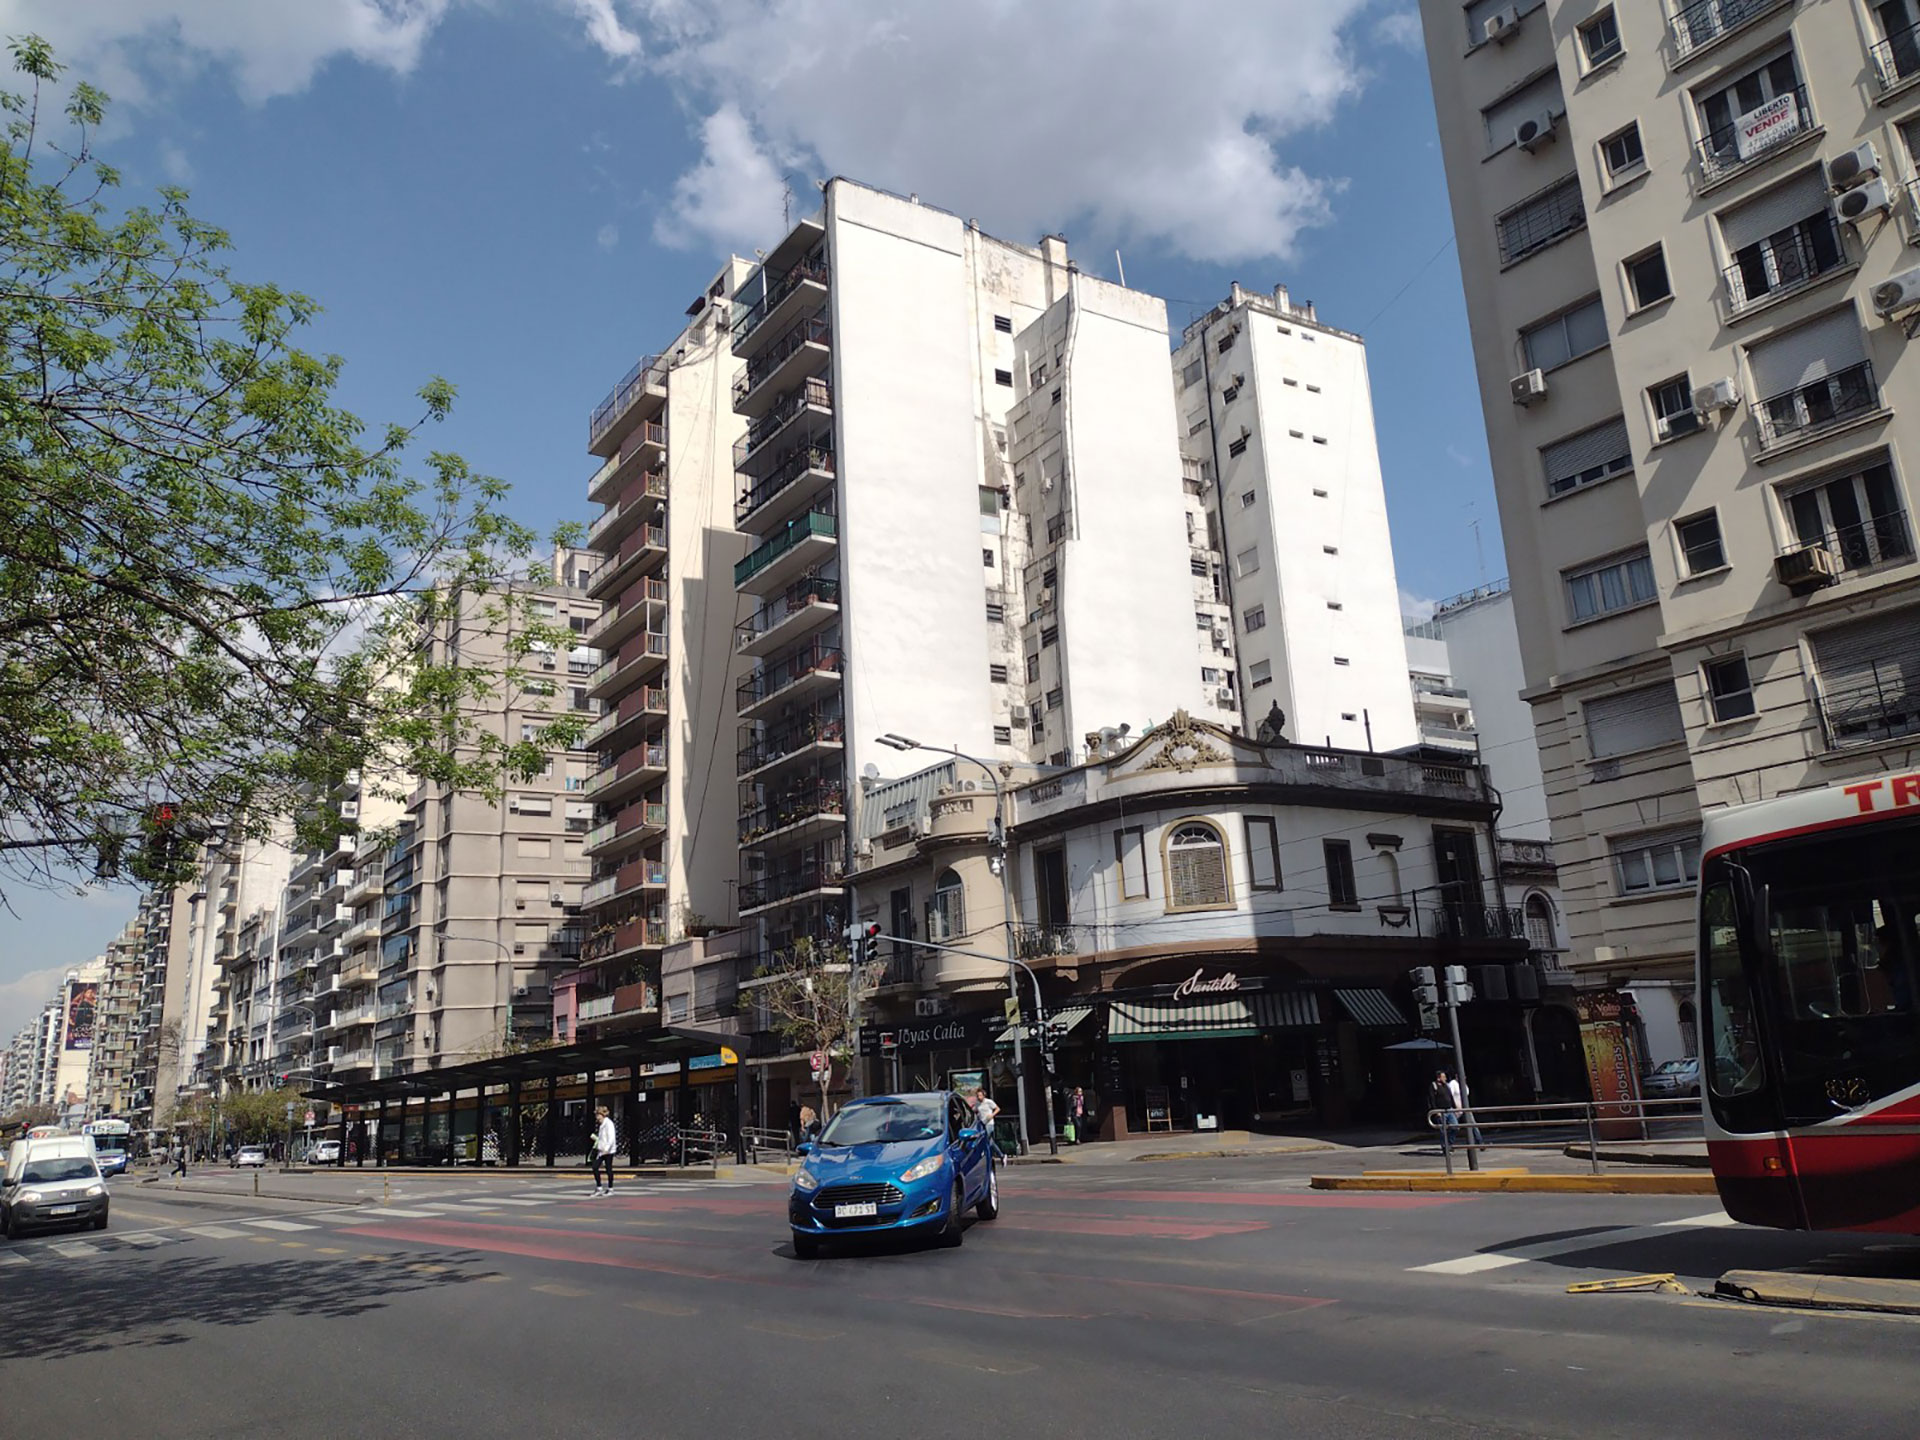 The Metrobus passes through Avenida Cabildo, for many it is key, for others it is not, and they prefer to live in other nearby points